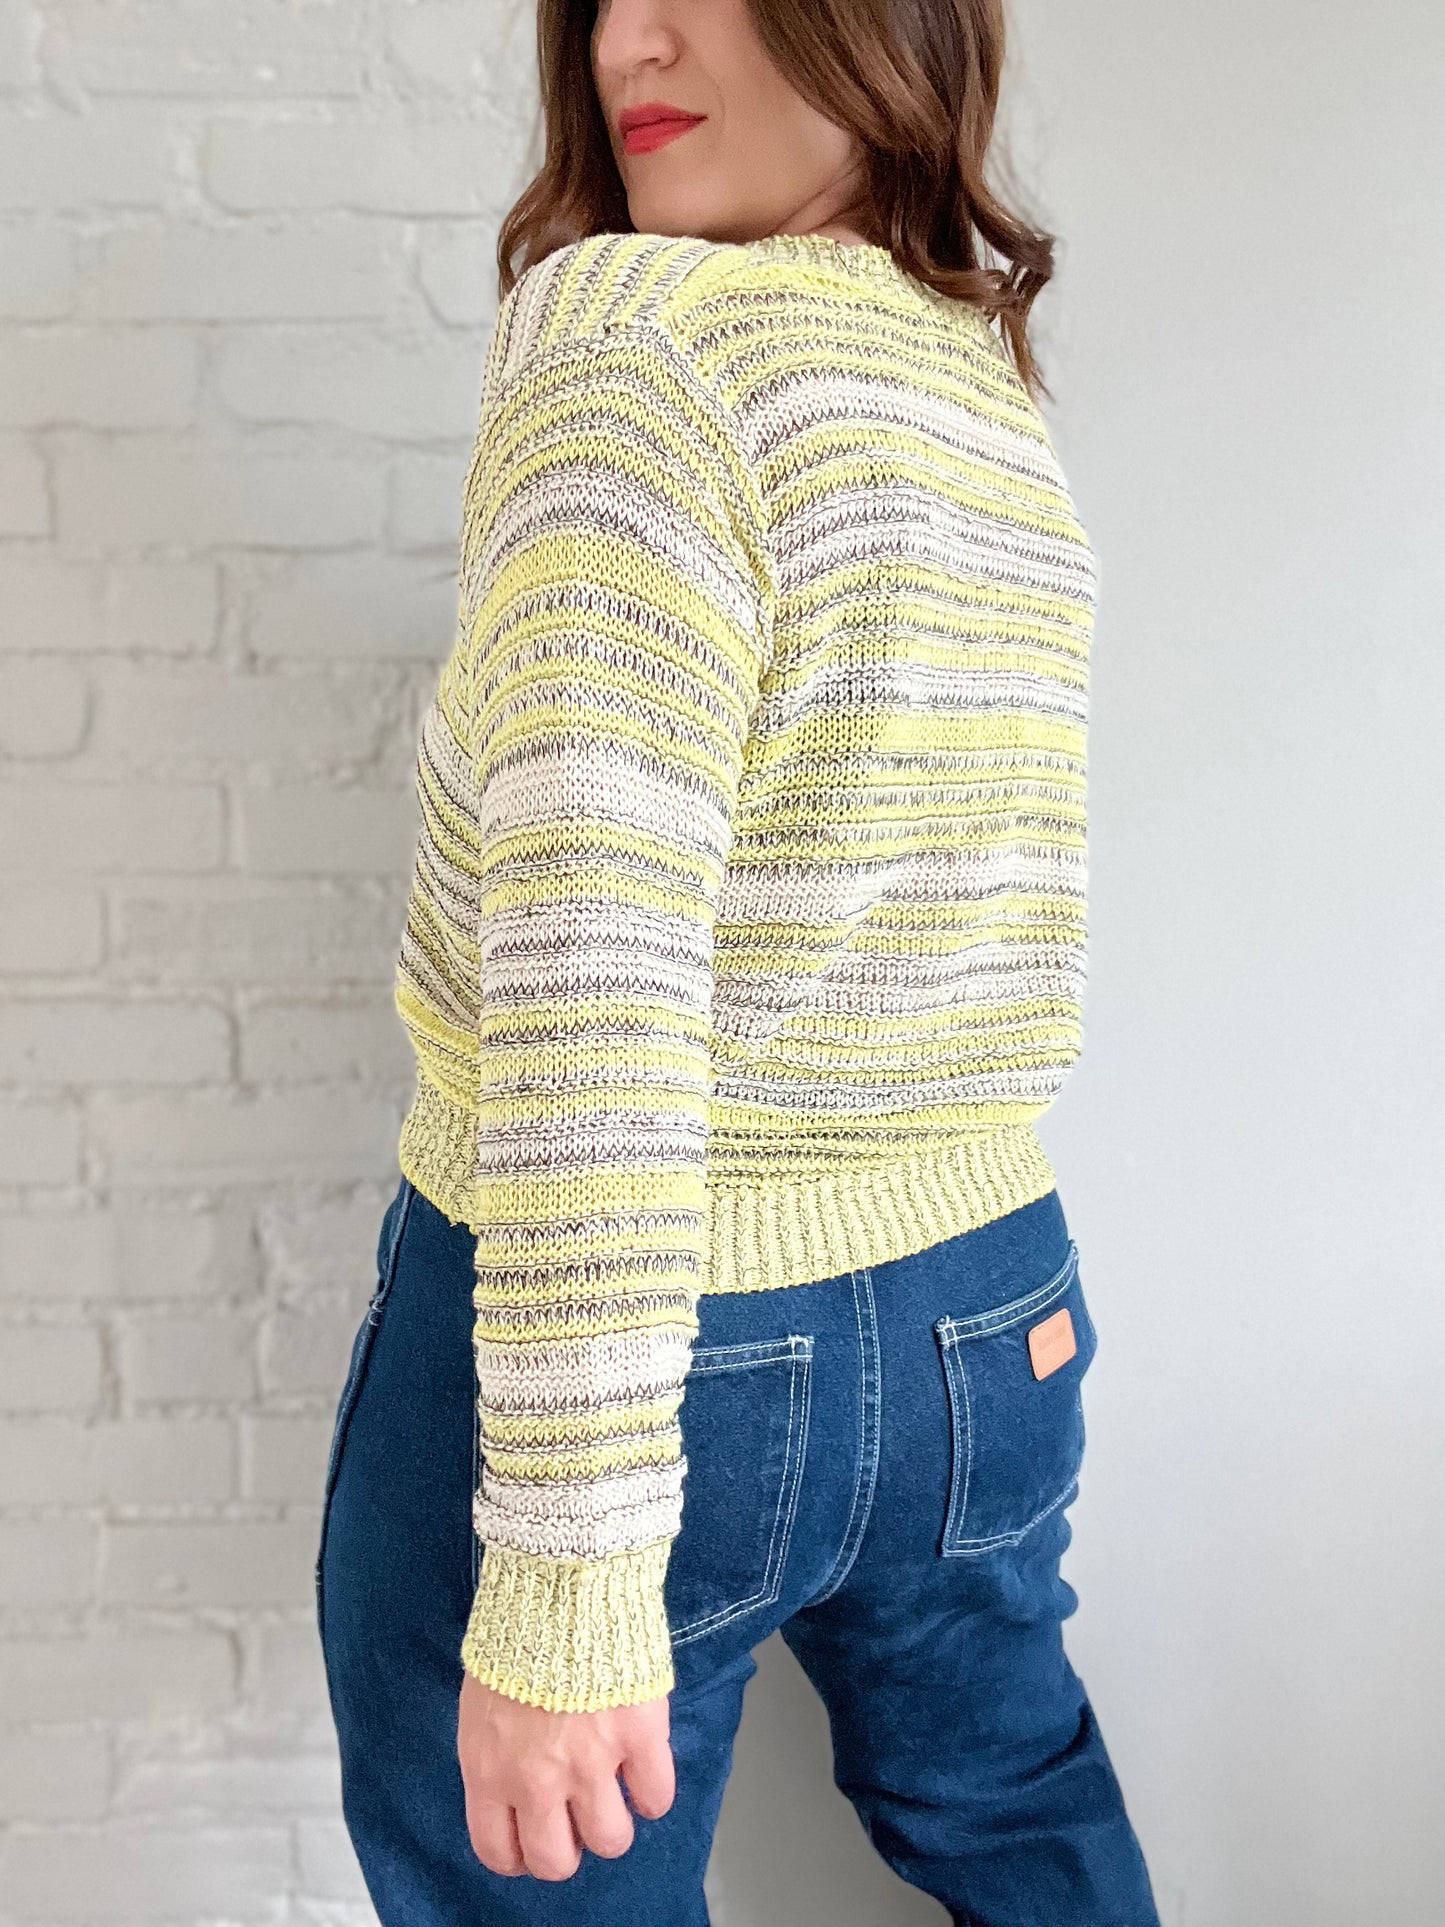 ASTR Crossover Knit Sweater - Size S